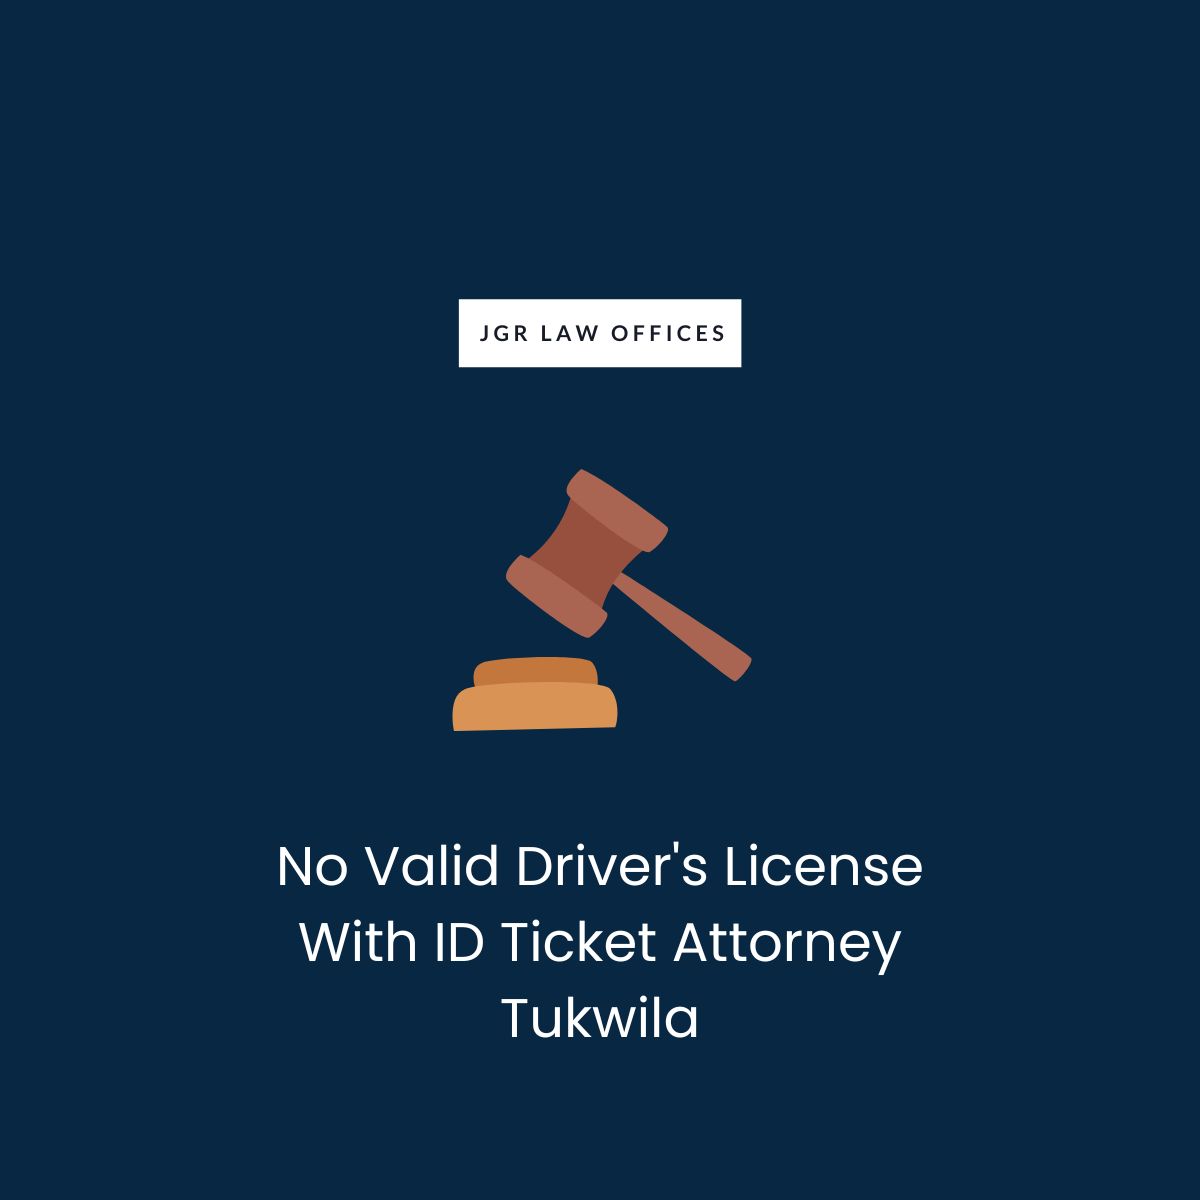 No Valid Driver's License With ID Ticket Attorney Tukwila